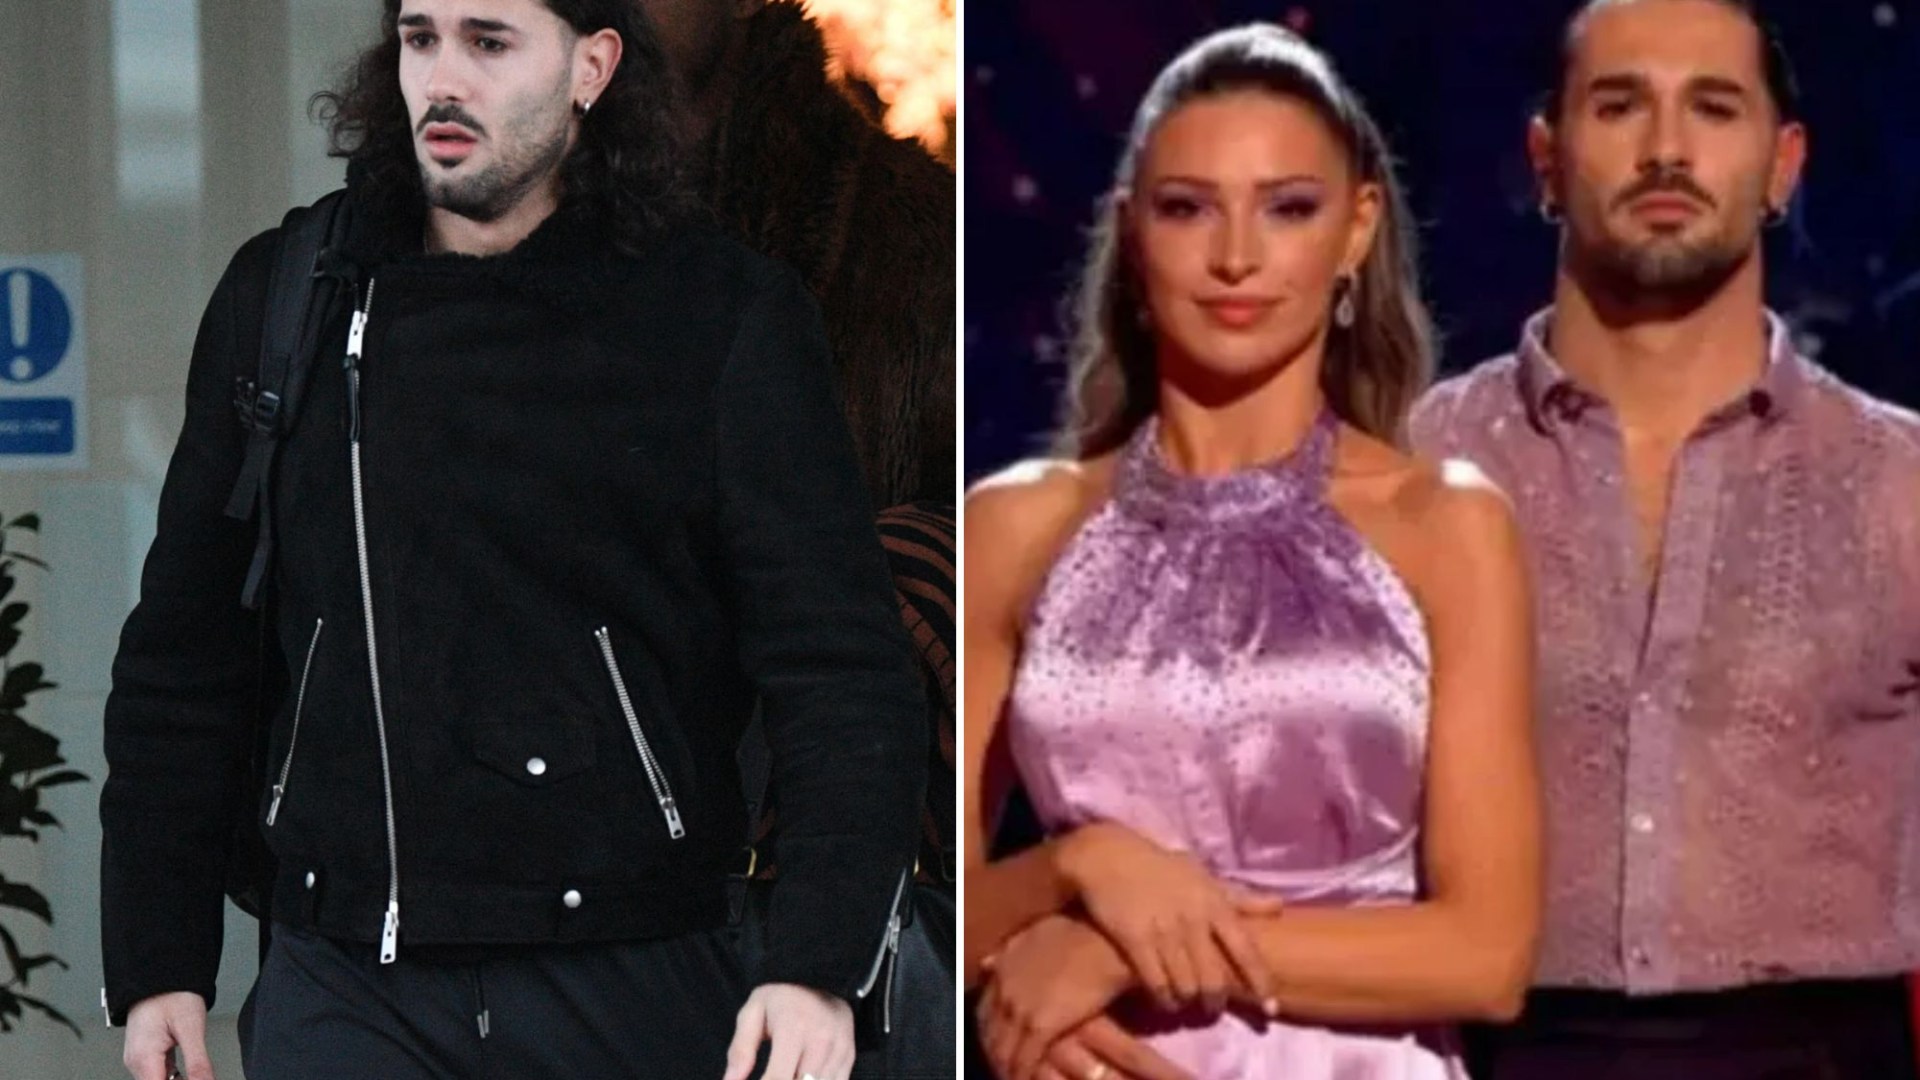 Strictly’s Graziano Di Prima ‘under medical supervision and being checked on hourly’ after Zara McDermott ‘kick’ row [Video]